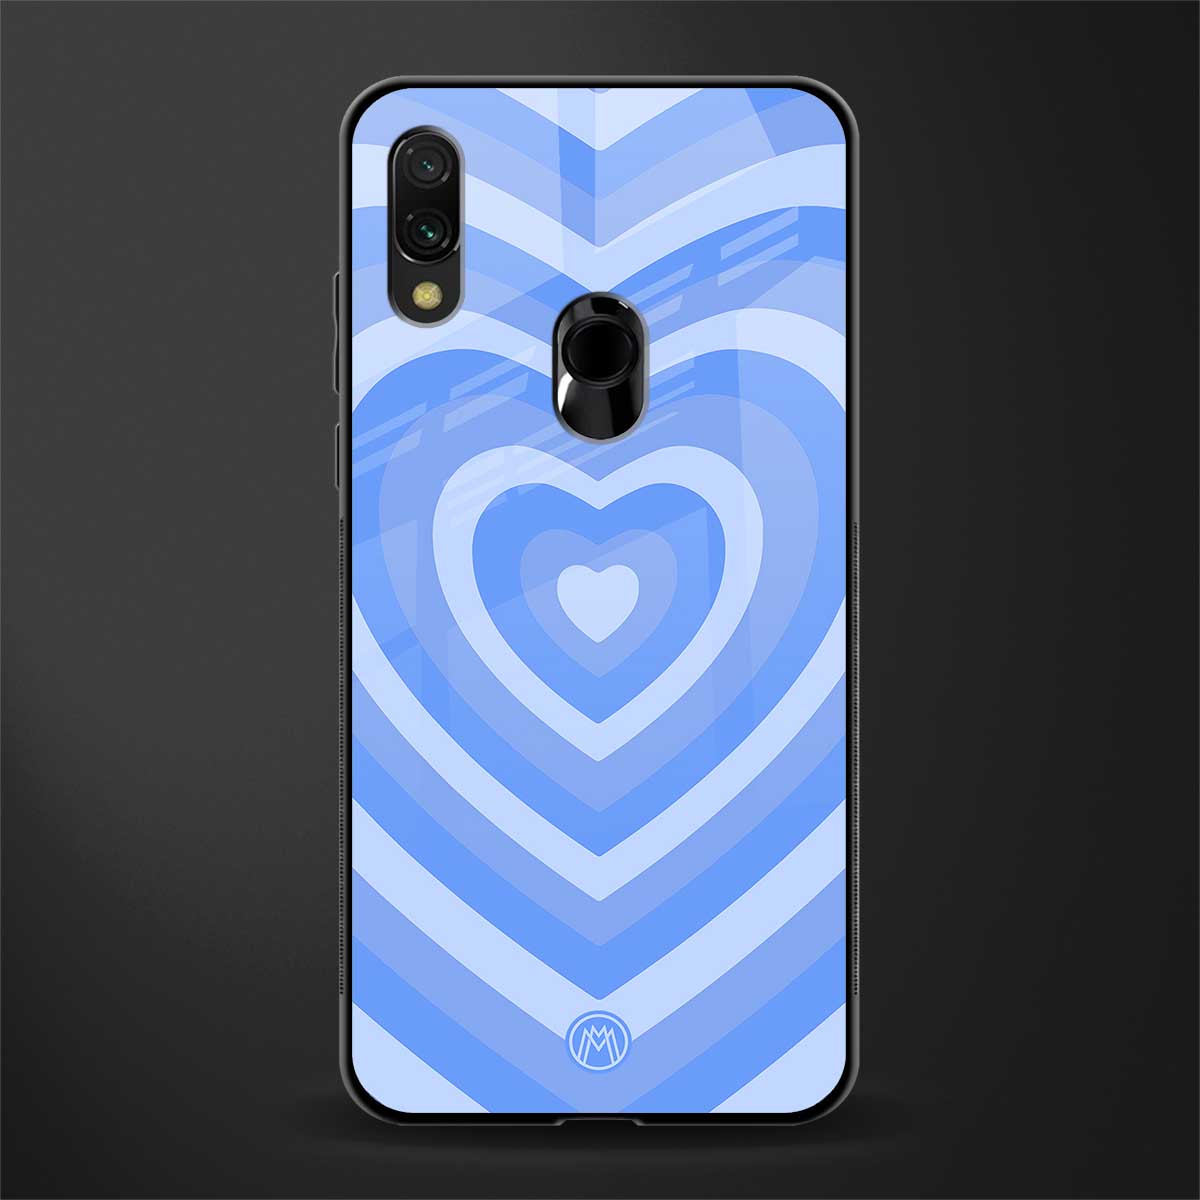 y2k blue hearts aesthetic glass case for redmi note 7 pro image